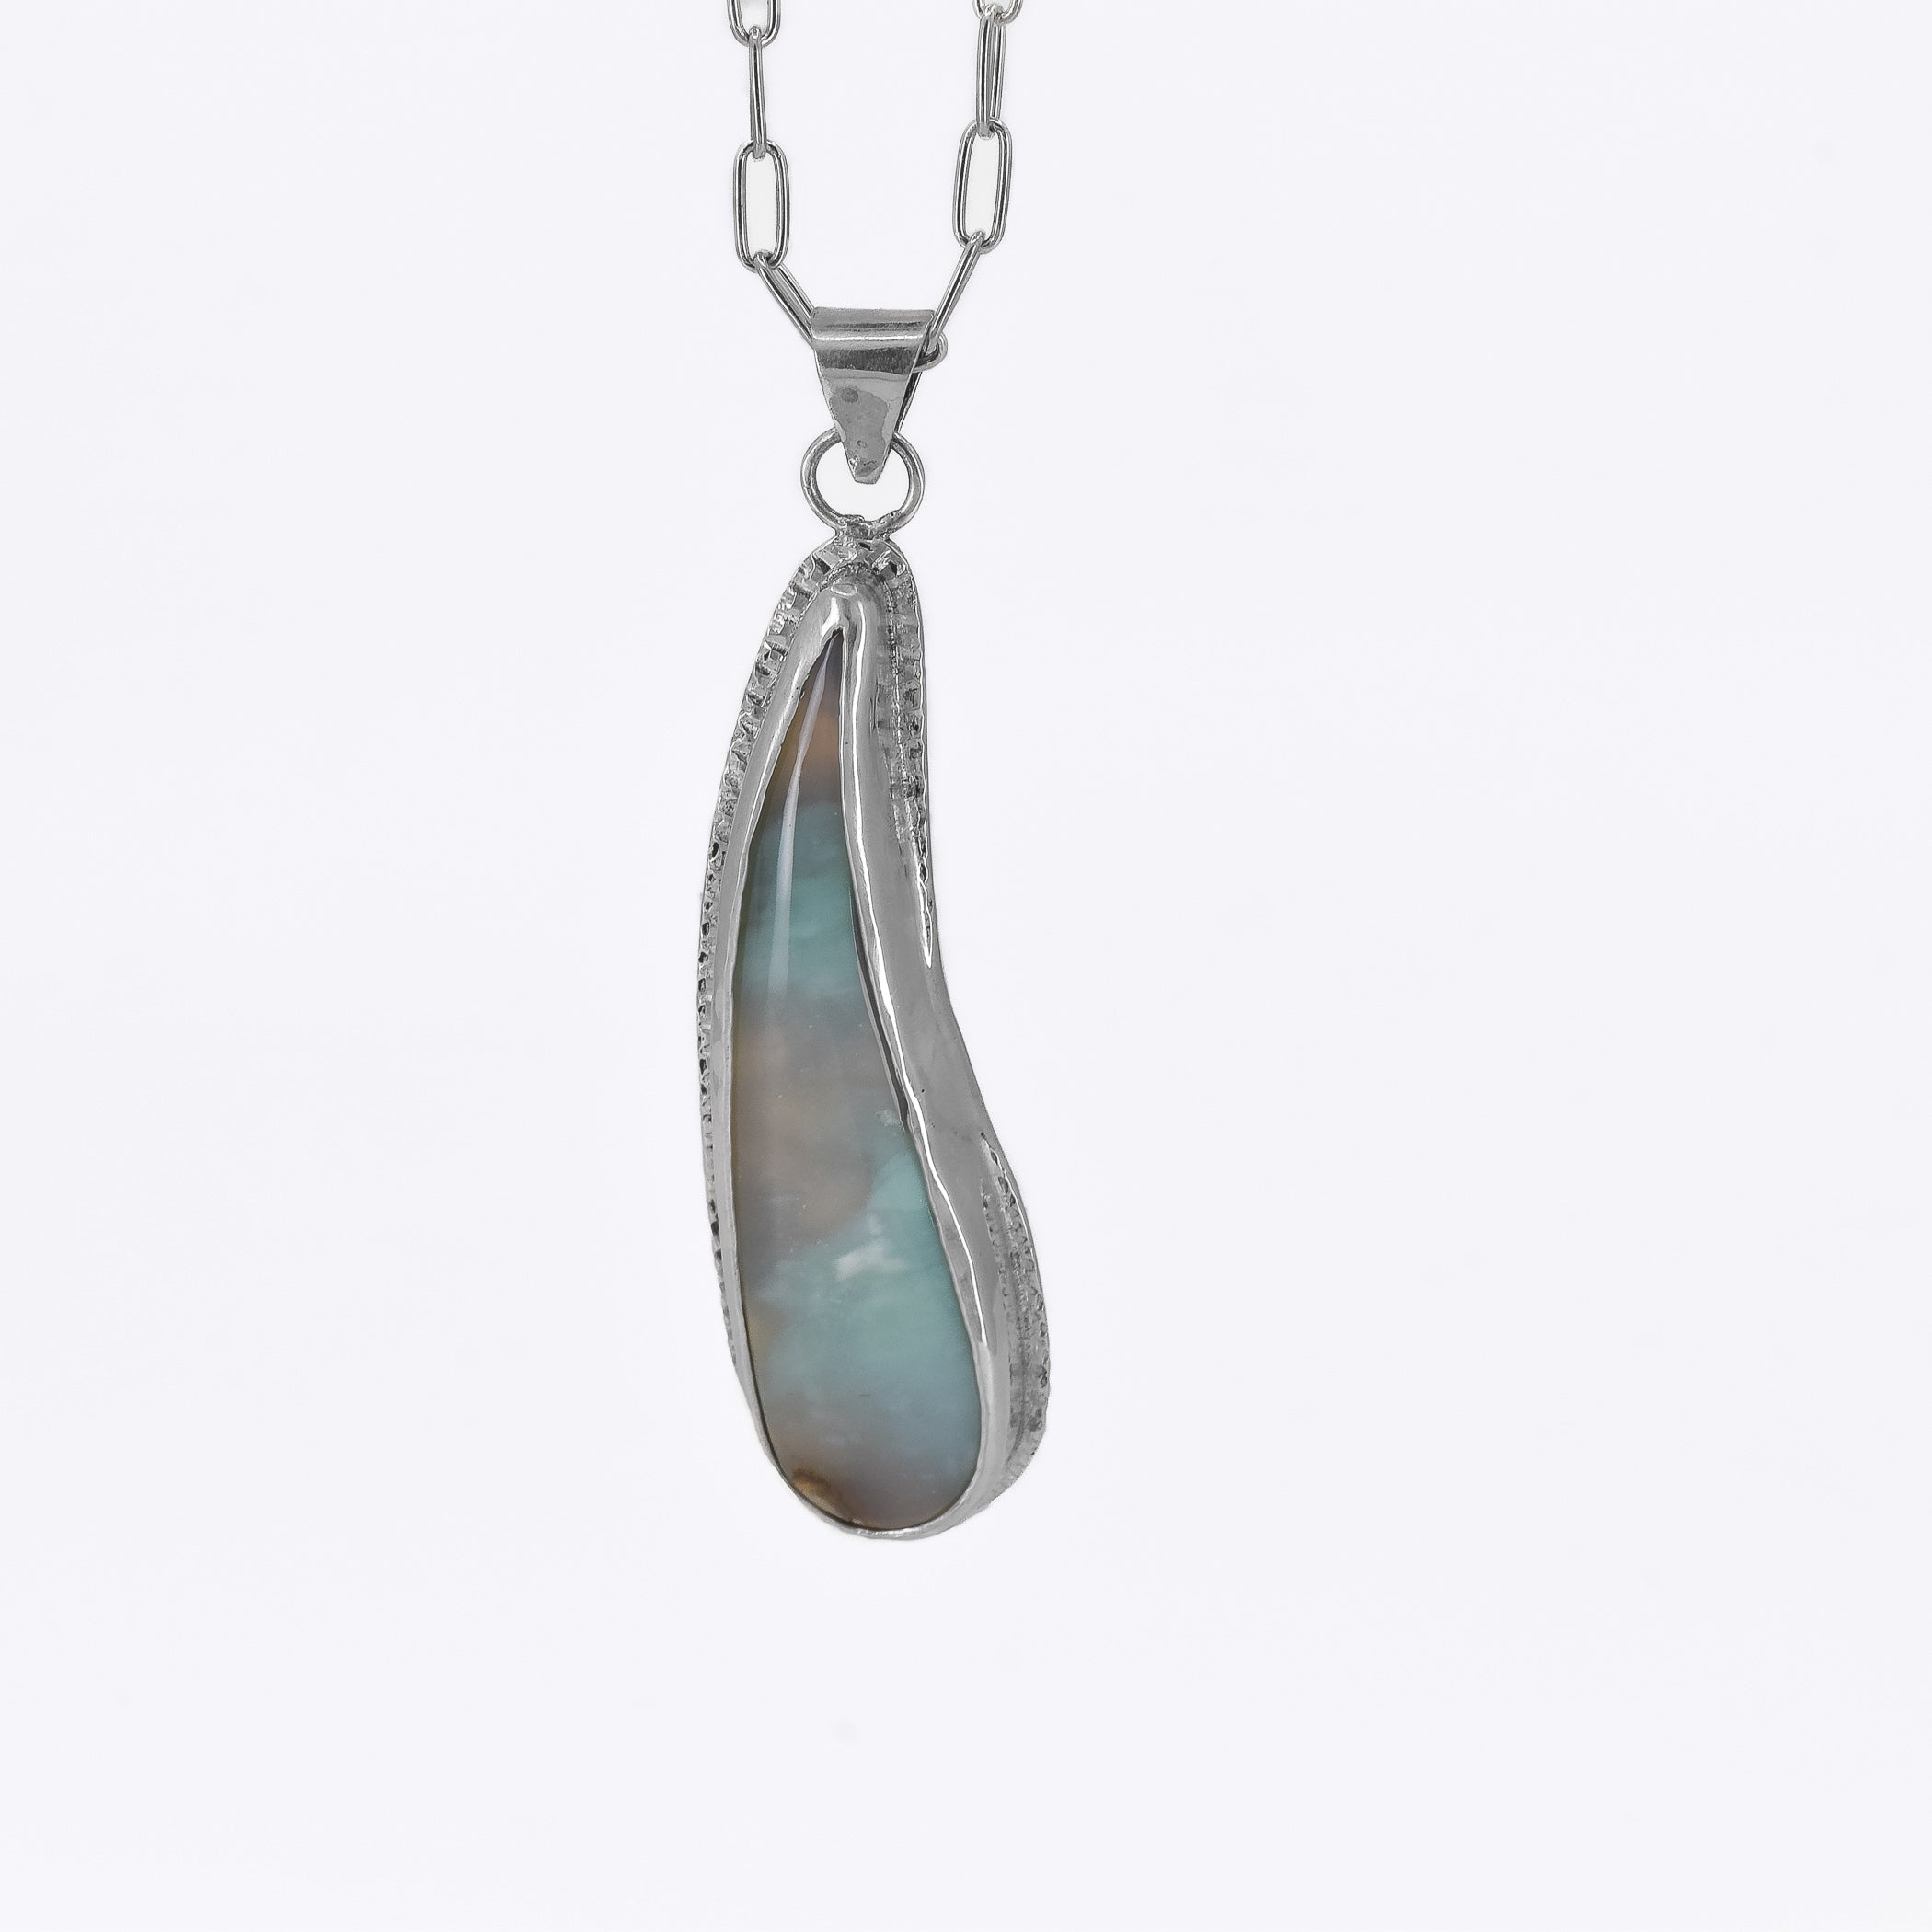 Blue opalized wood pendant necklace in sterling silver